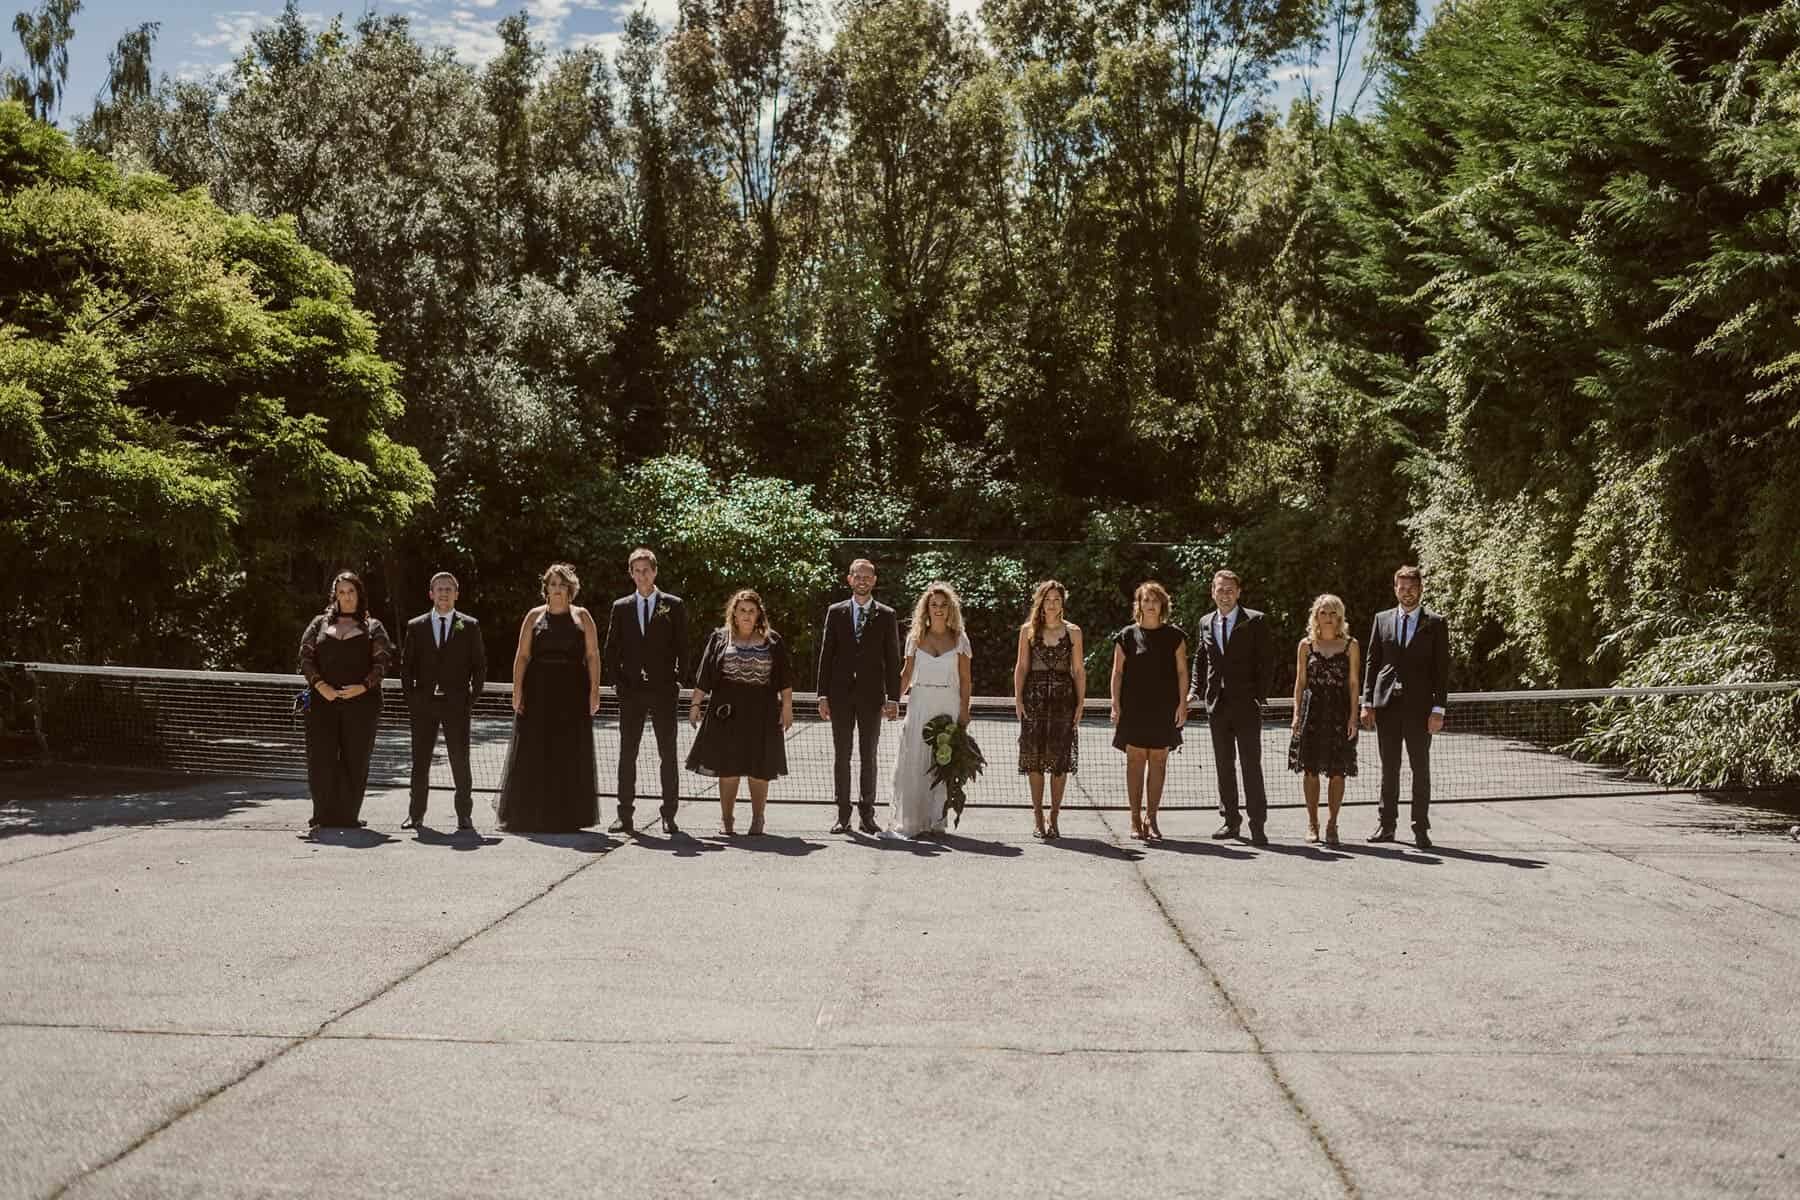 all-in-black bridal party